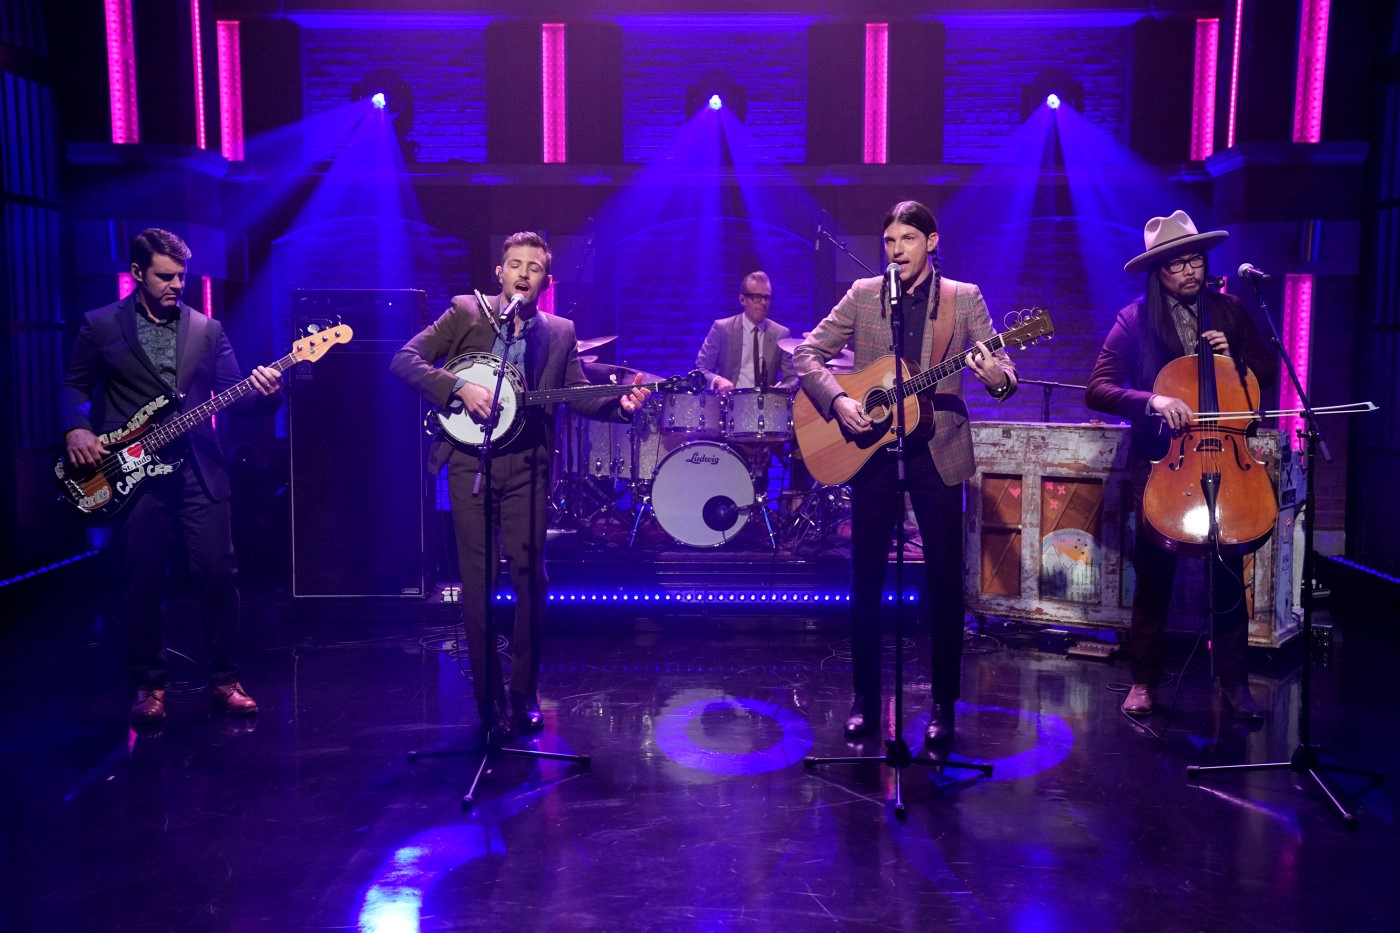 Video: The Avett Brothers Debut New Music on ‘Late Night’